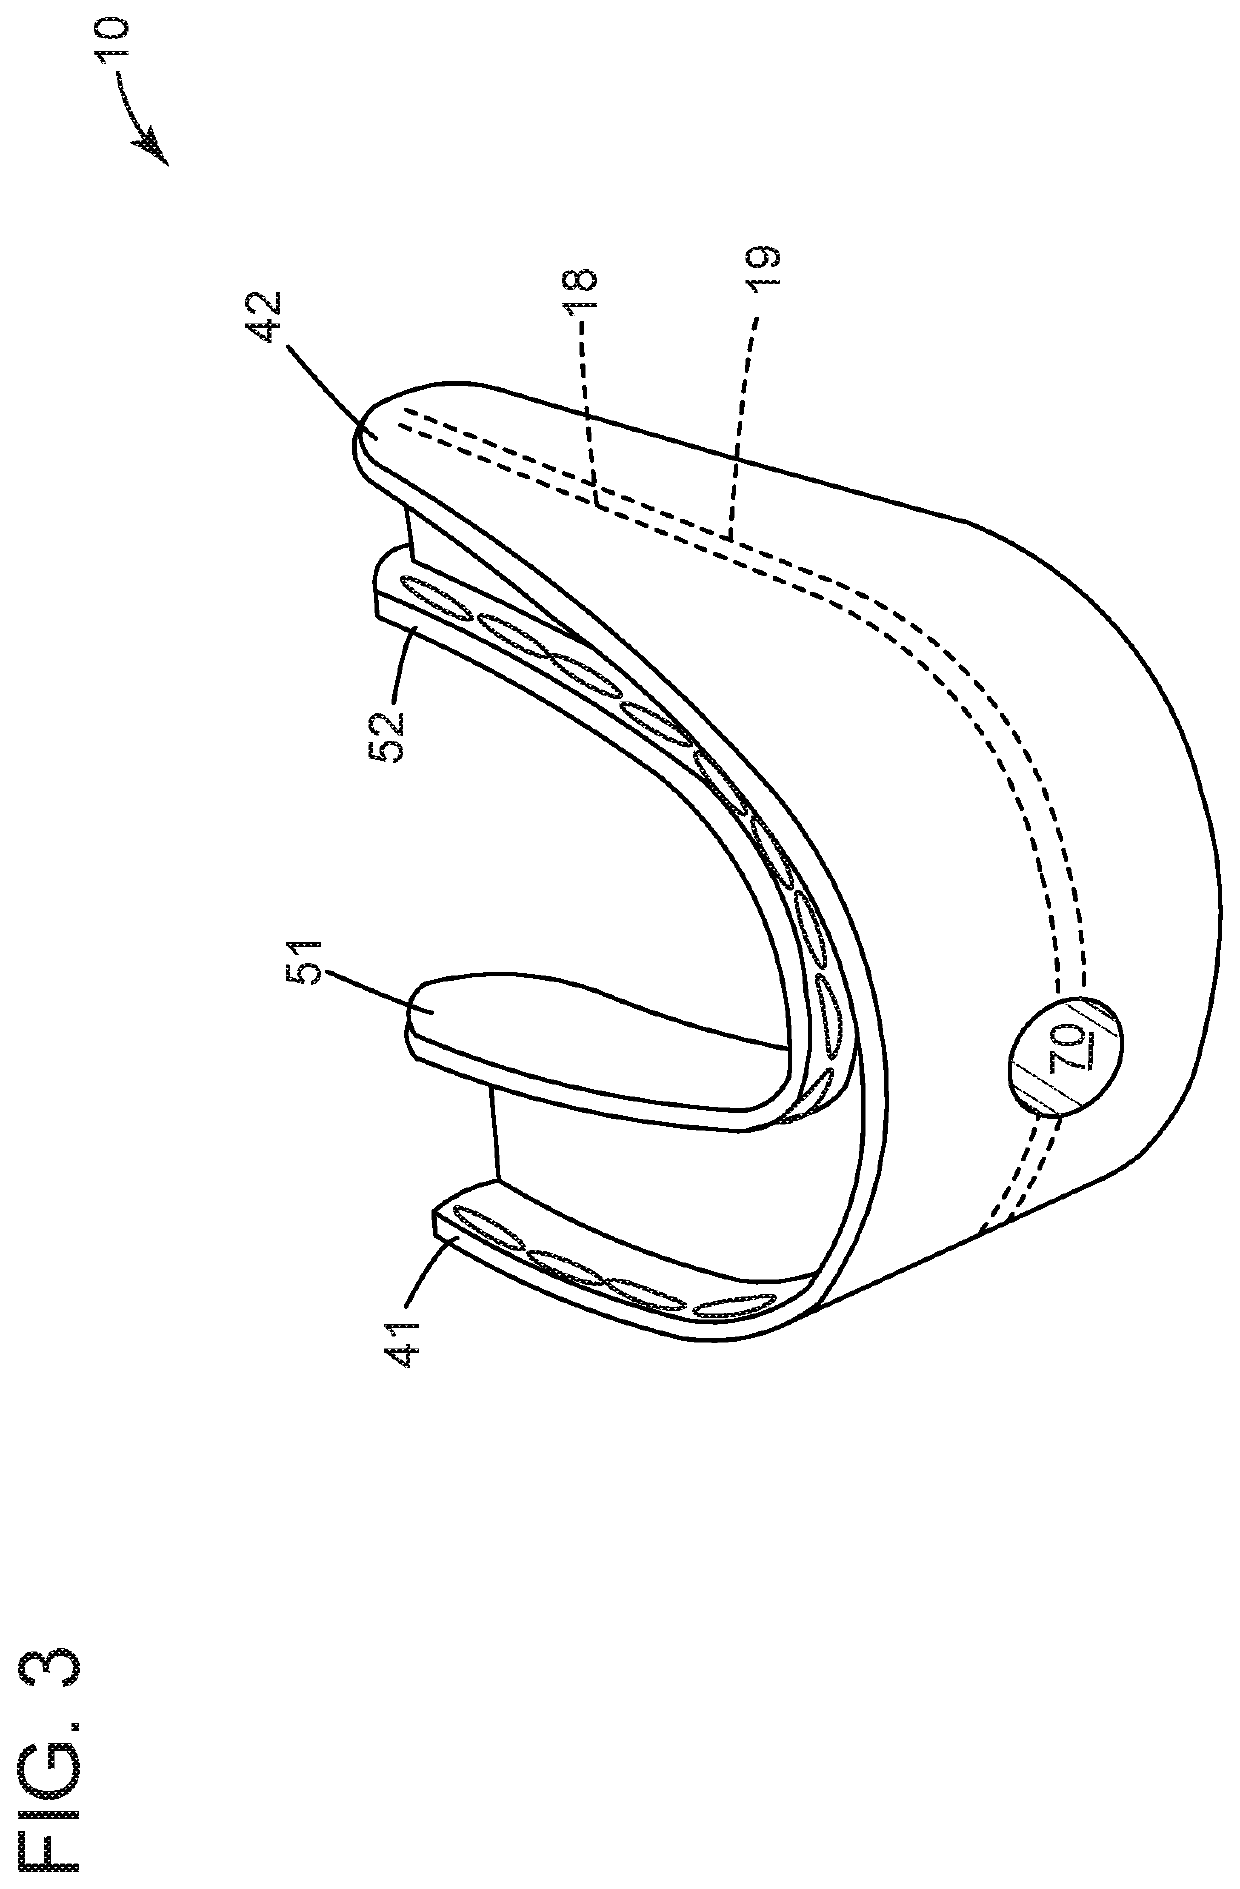 Hand-held therapeutic oral device for cooling of oral tissue of a user